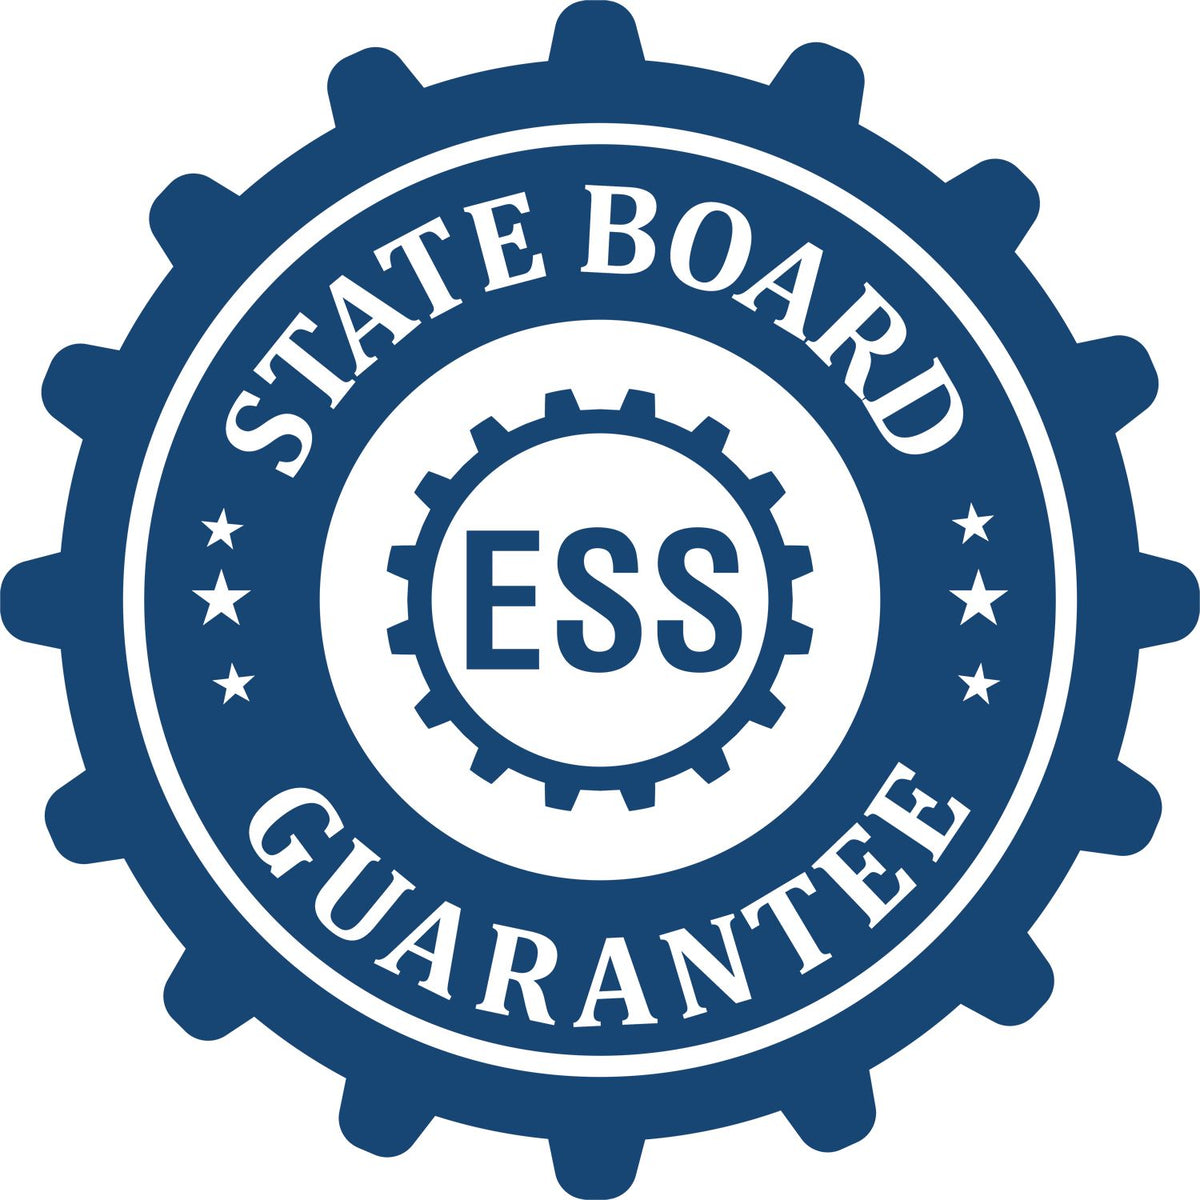 An emblem in a gear shape illustrating a state board guarantee for the Digital Vermont Geologist Stamp, Electronic Seal for Vermont Geologist